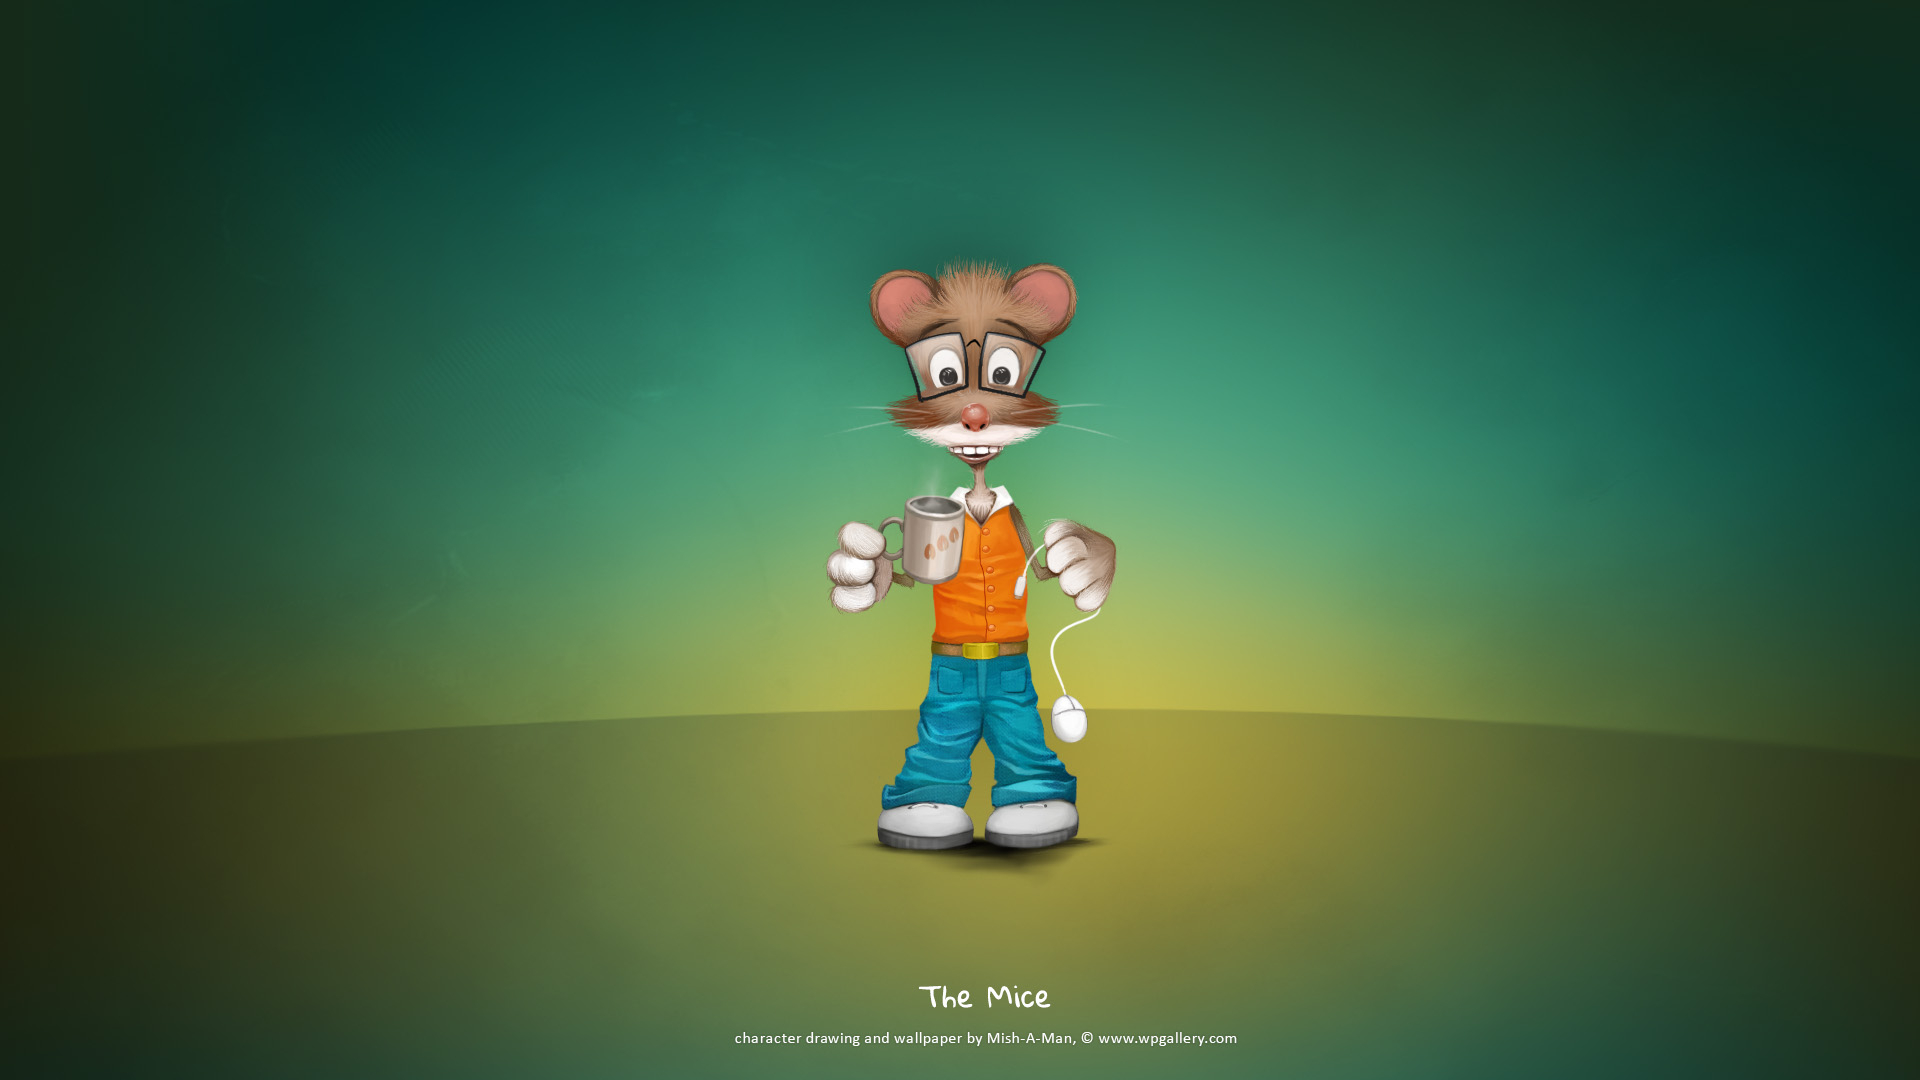 The Mice for 1920 x 1080 HDTV 1080p resolution